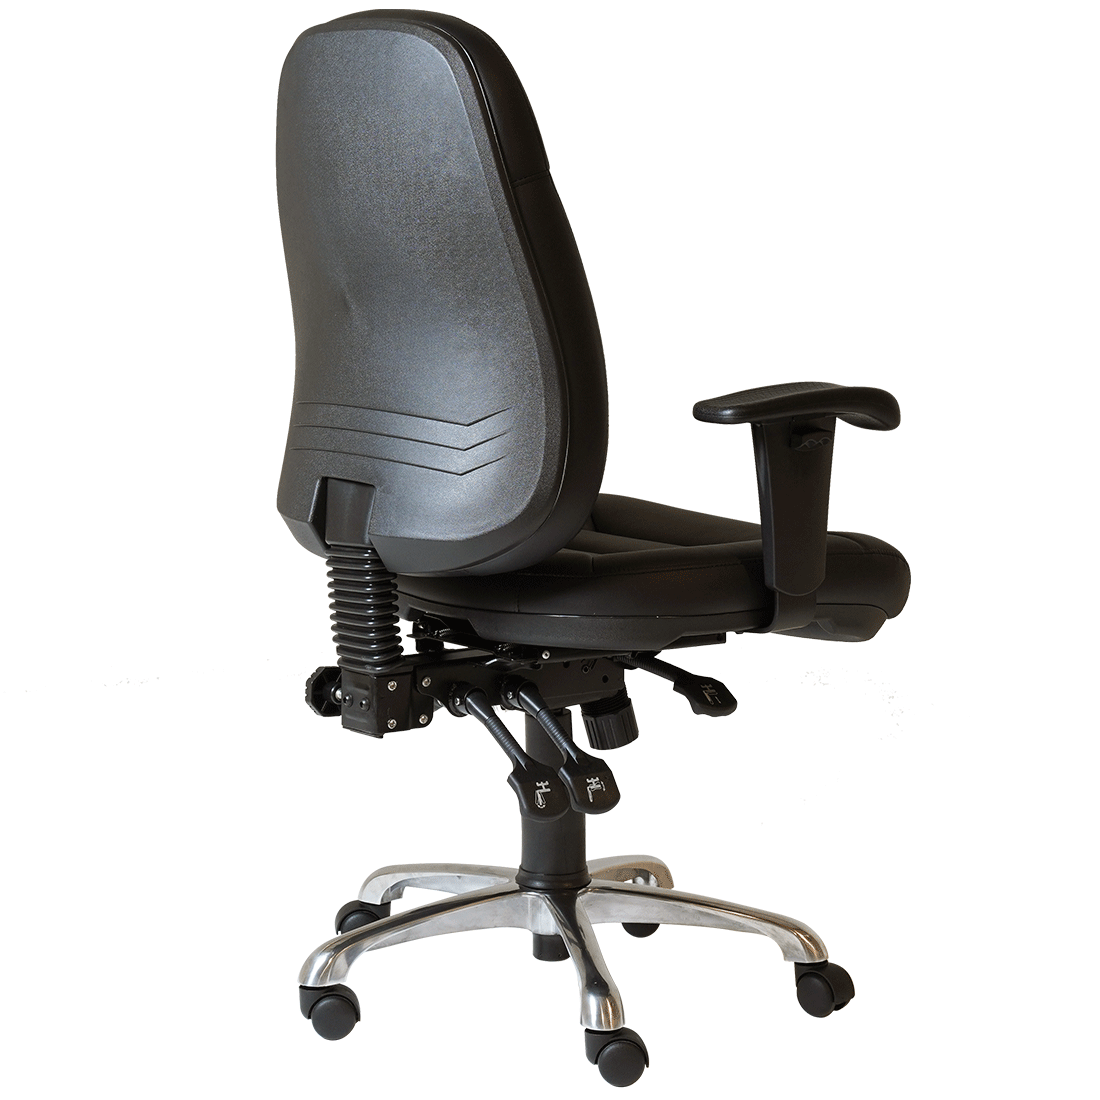 PU300 PU Leather Commercial Grade Chair - switchoffice.com.au